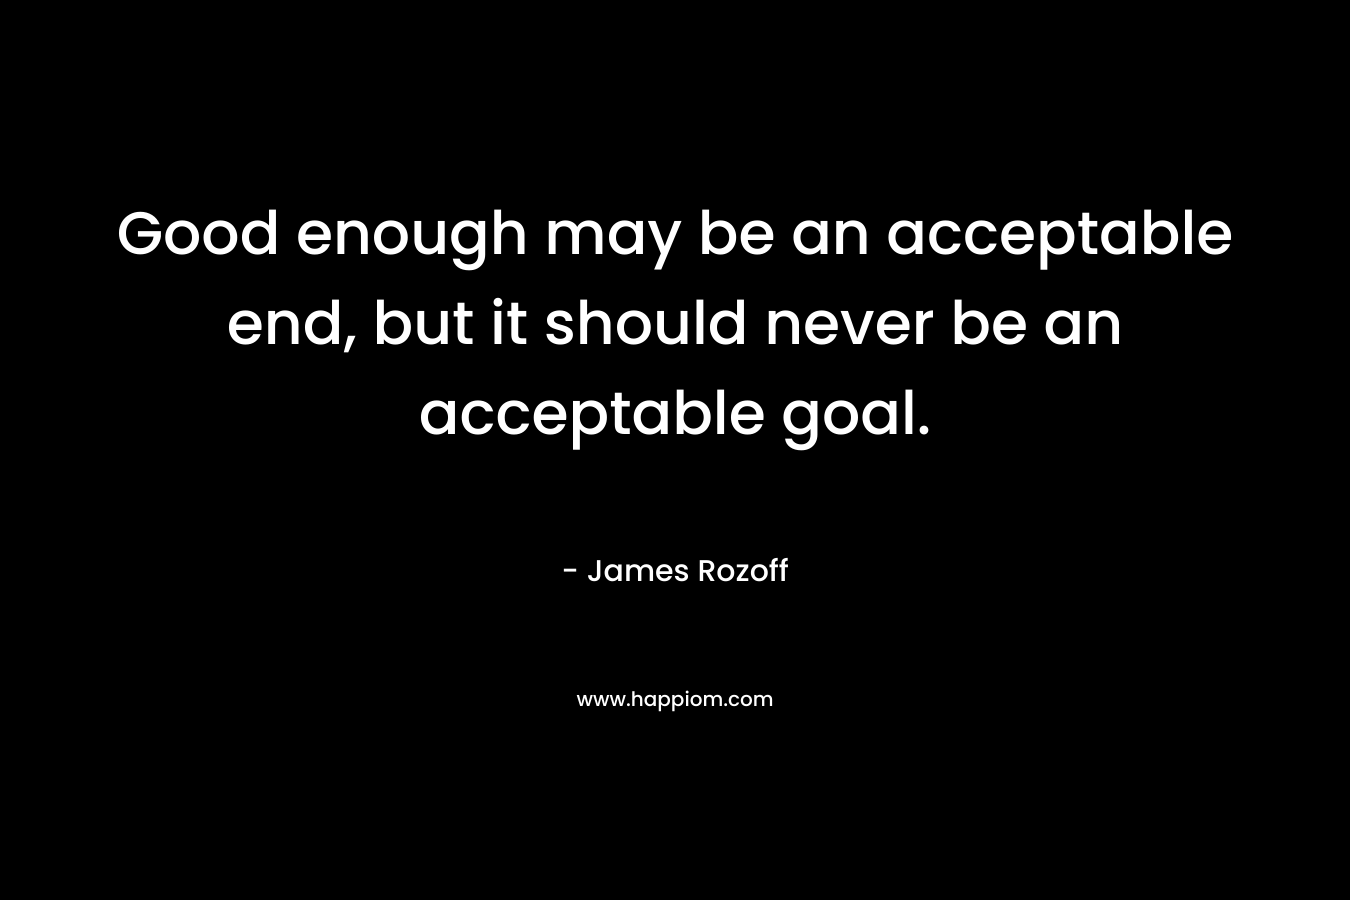 Good enough may be an acceptable end, but it should never be an acceptable goal.